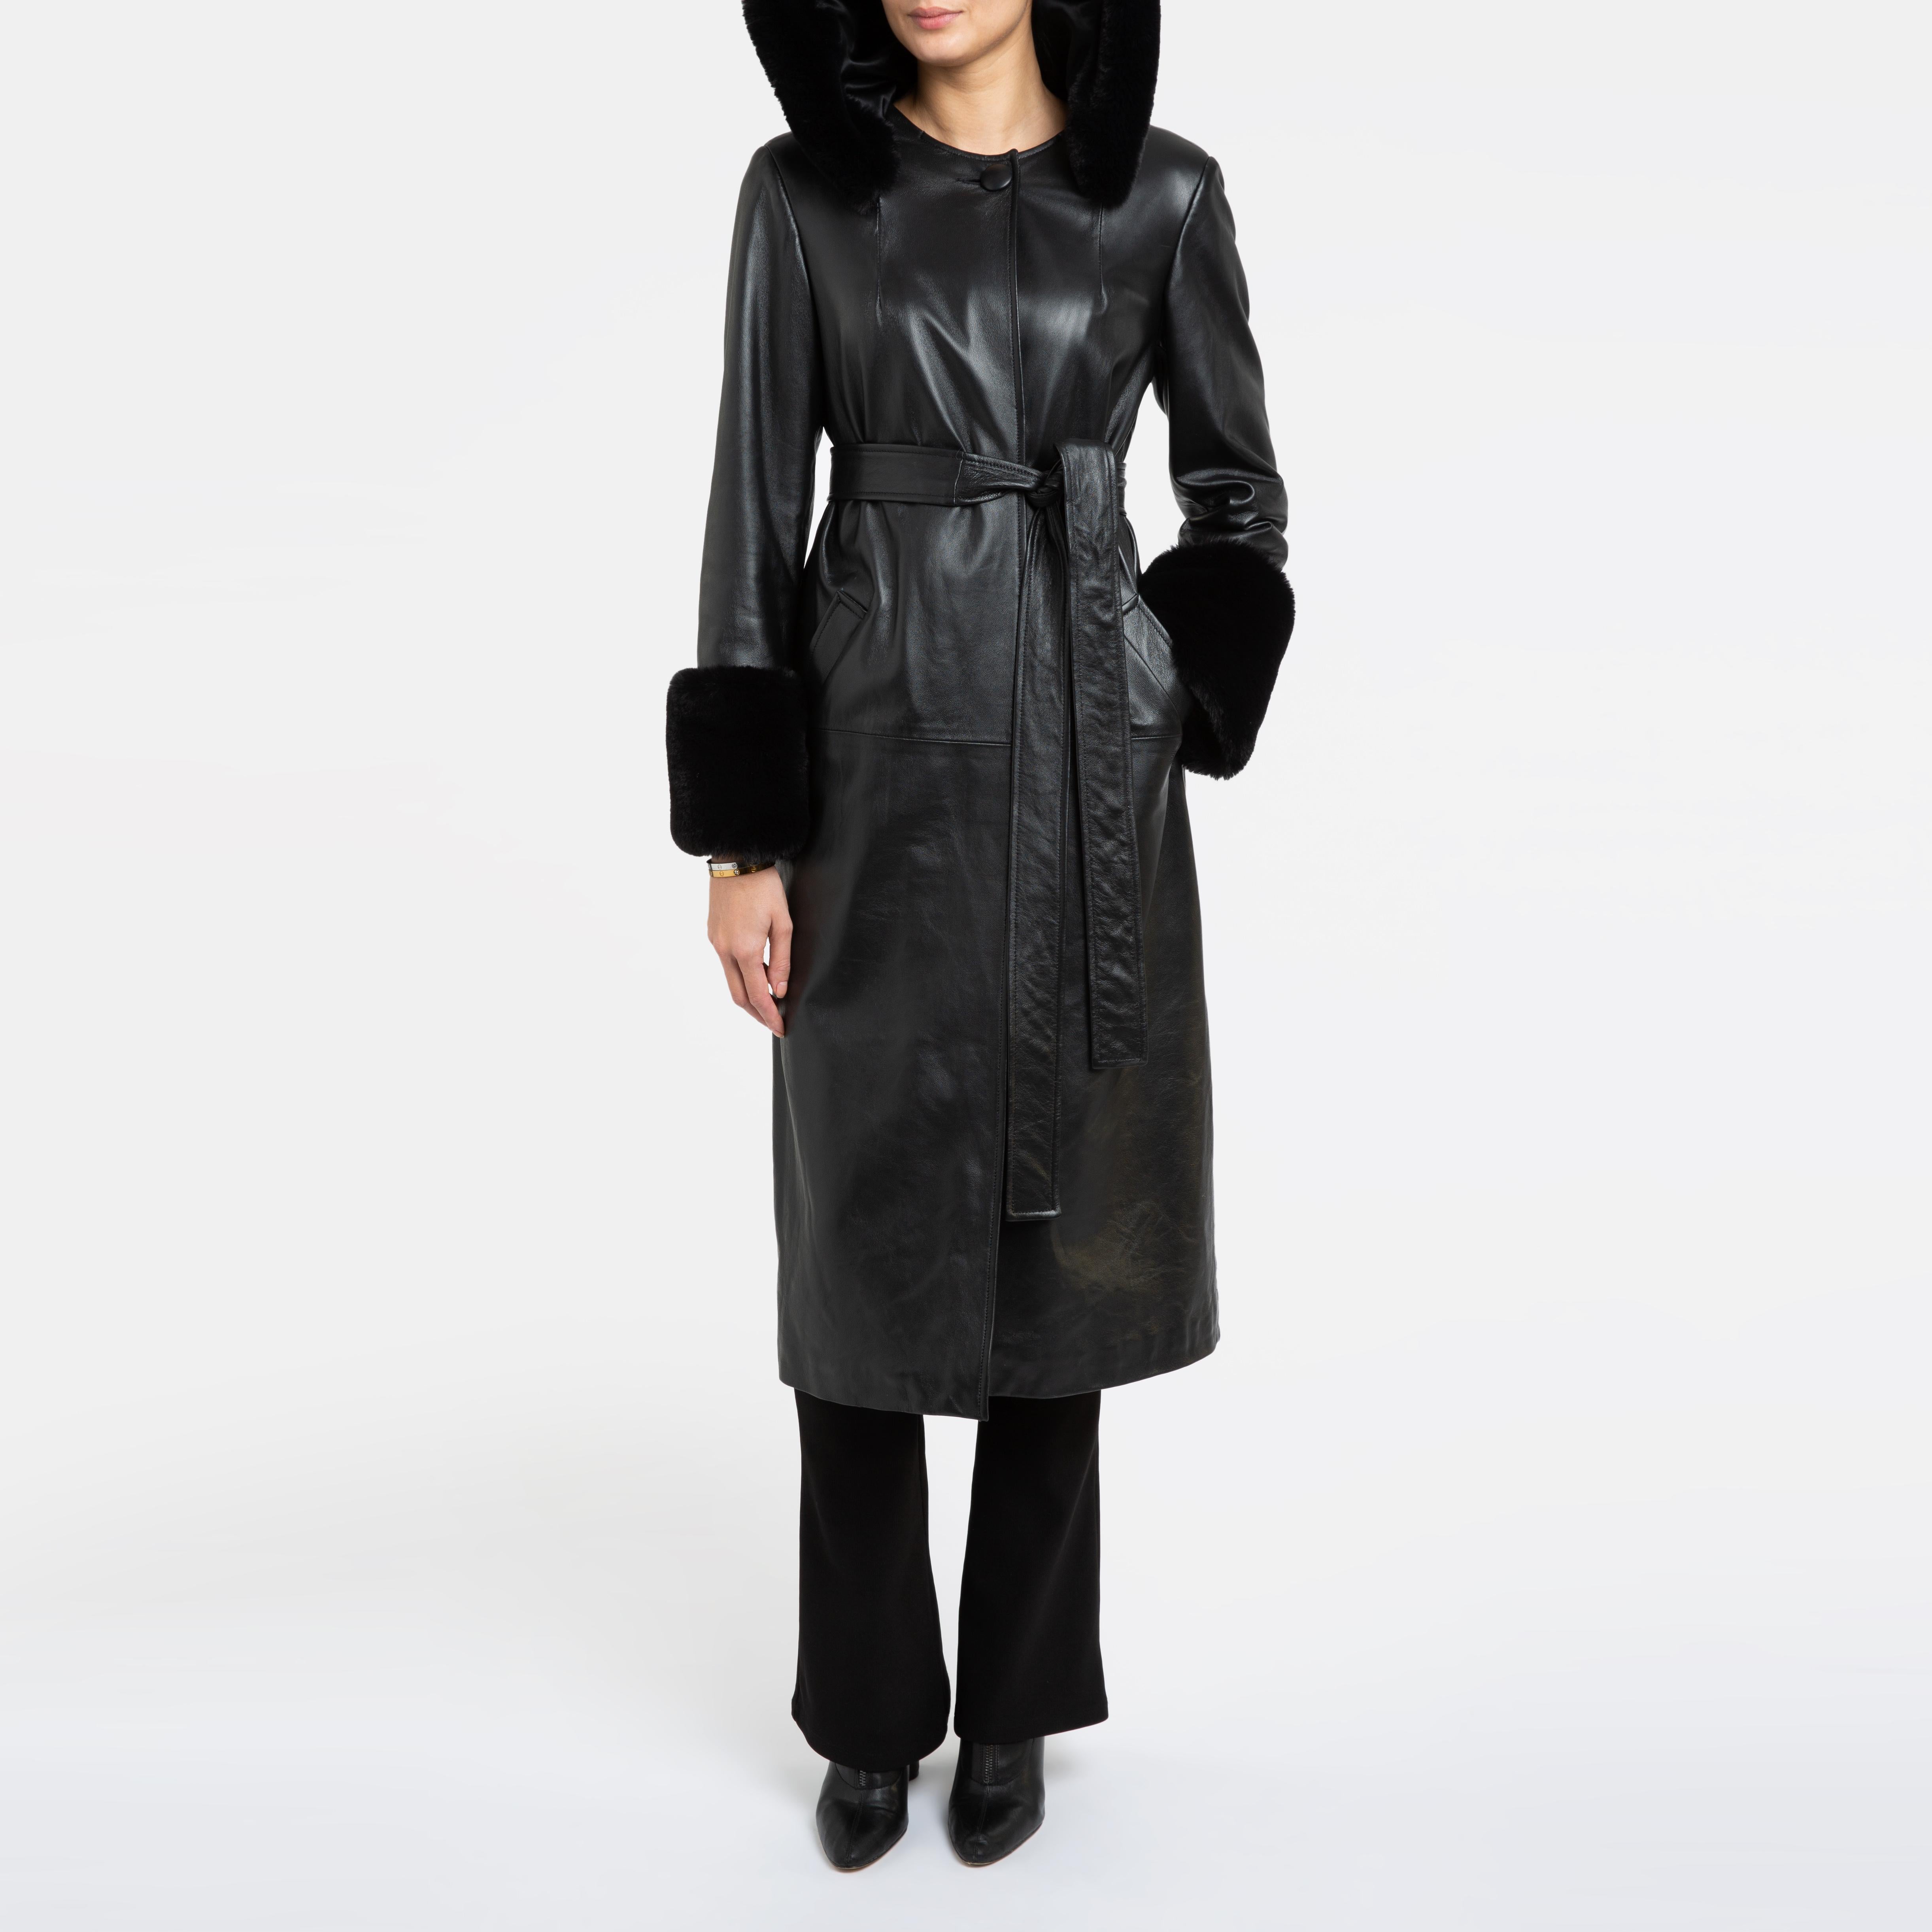 Verheyen London Hooded Leather Trench Coat in Black with Faux Fur - Size uk 10  For Sale 6